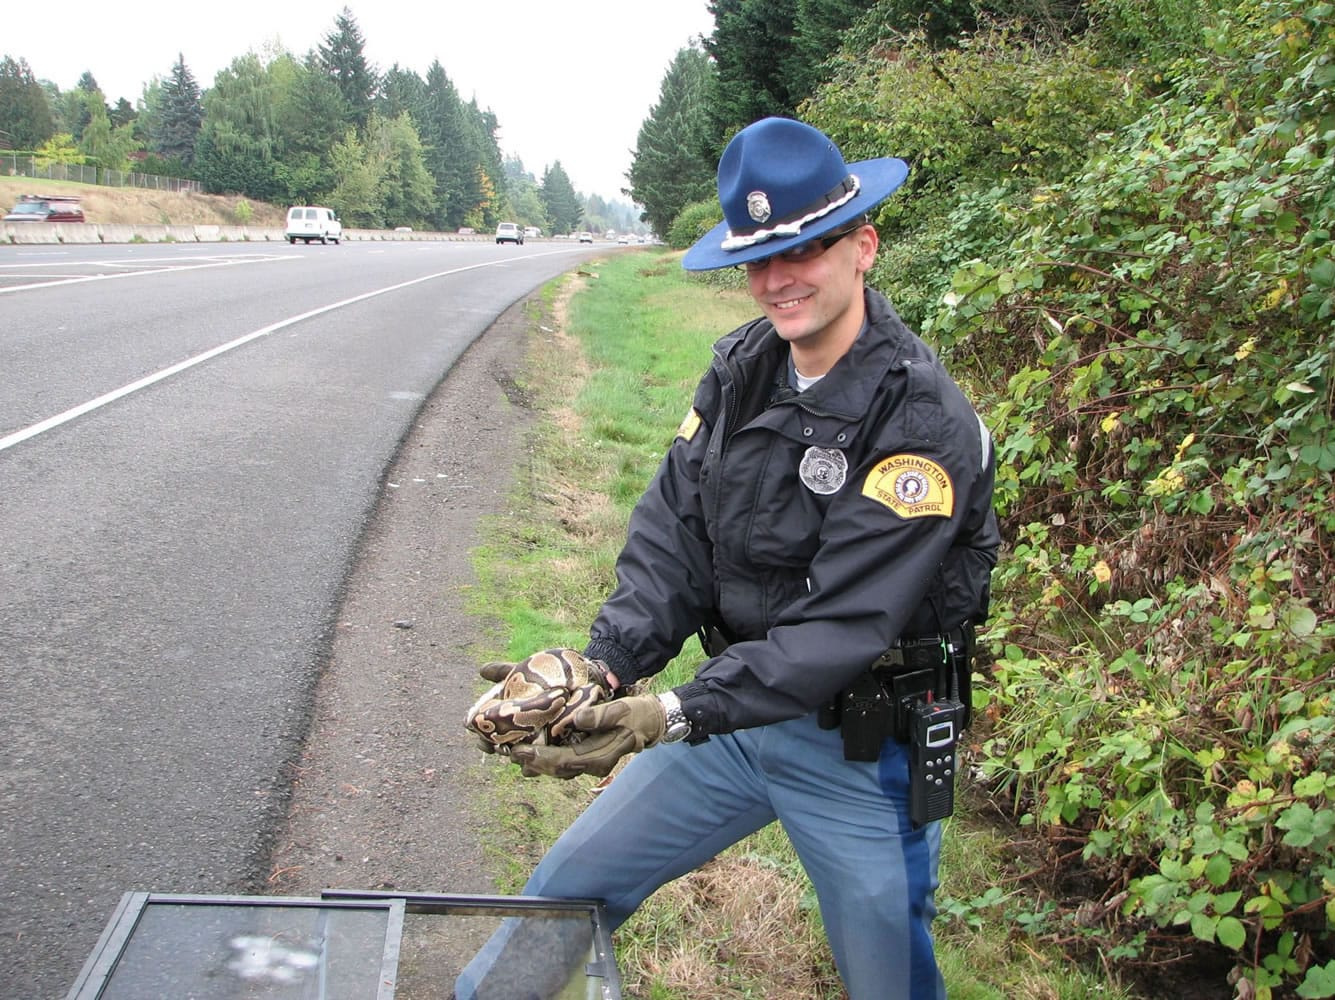 Trooper Jesse Layman, wearing gloves, holds a 5-foot boa constrictor that was found outside a terrarium on the side of state Highway 14 near Lieser Road on Friday morning.